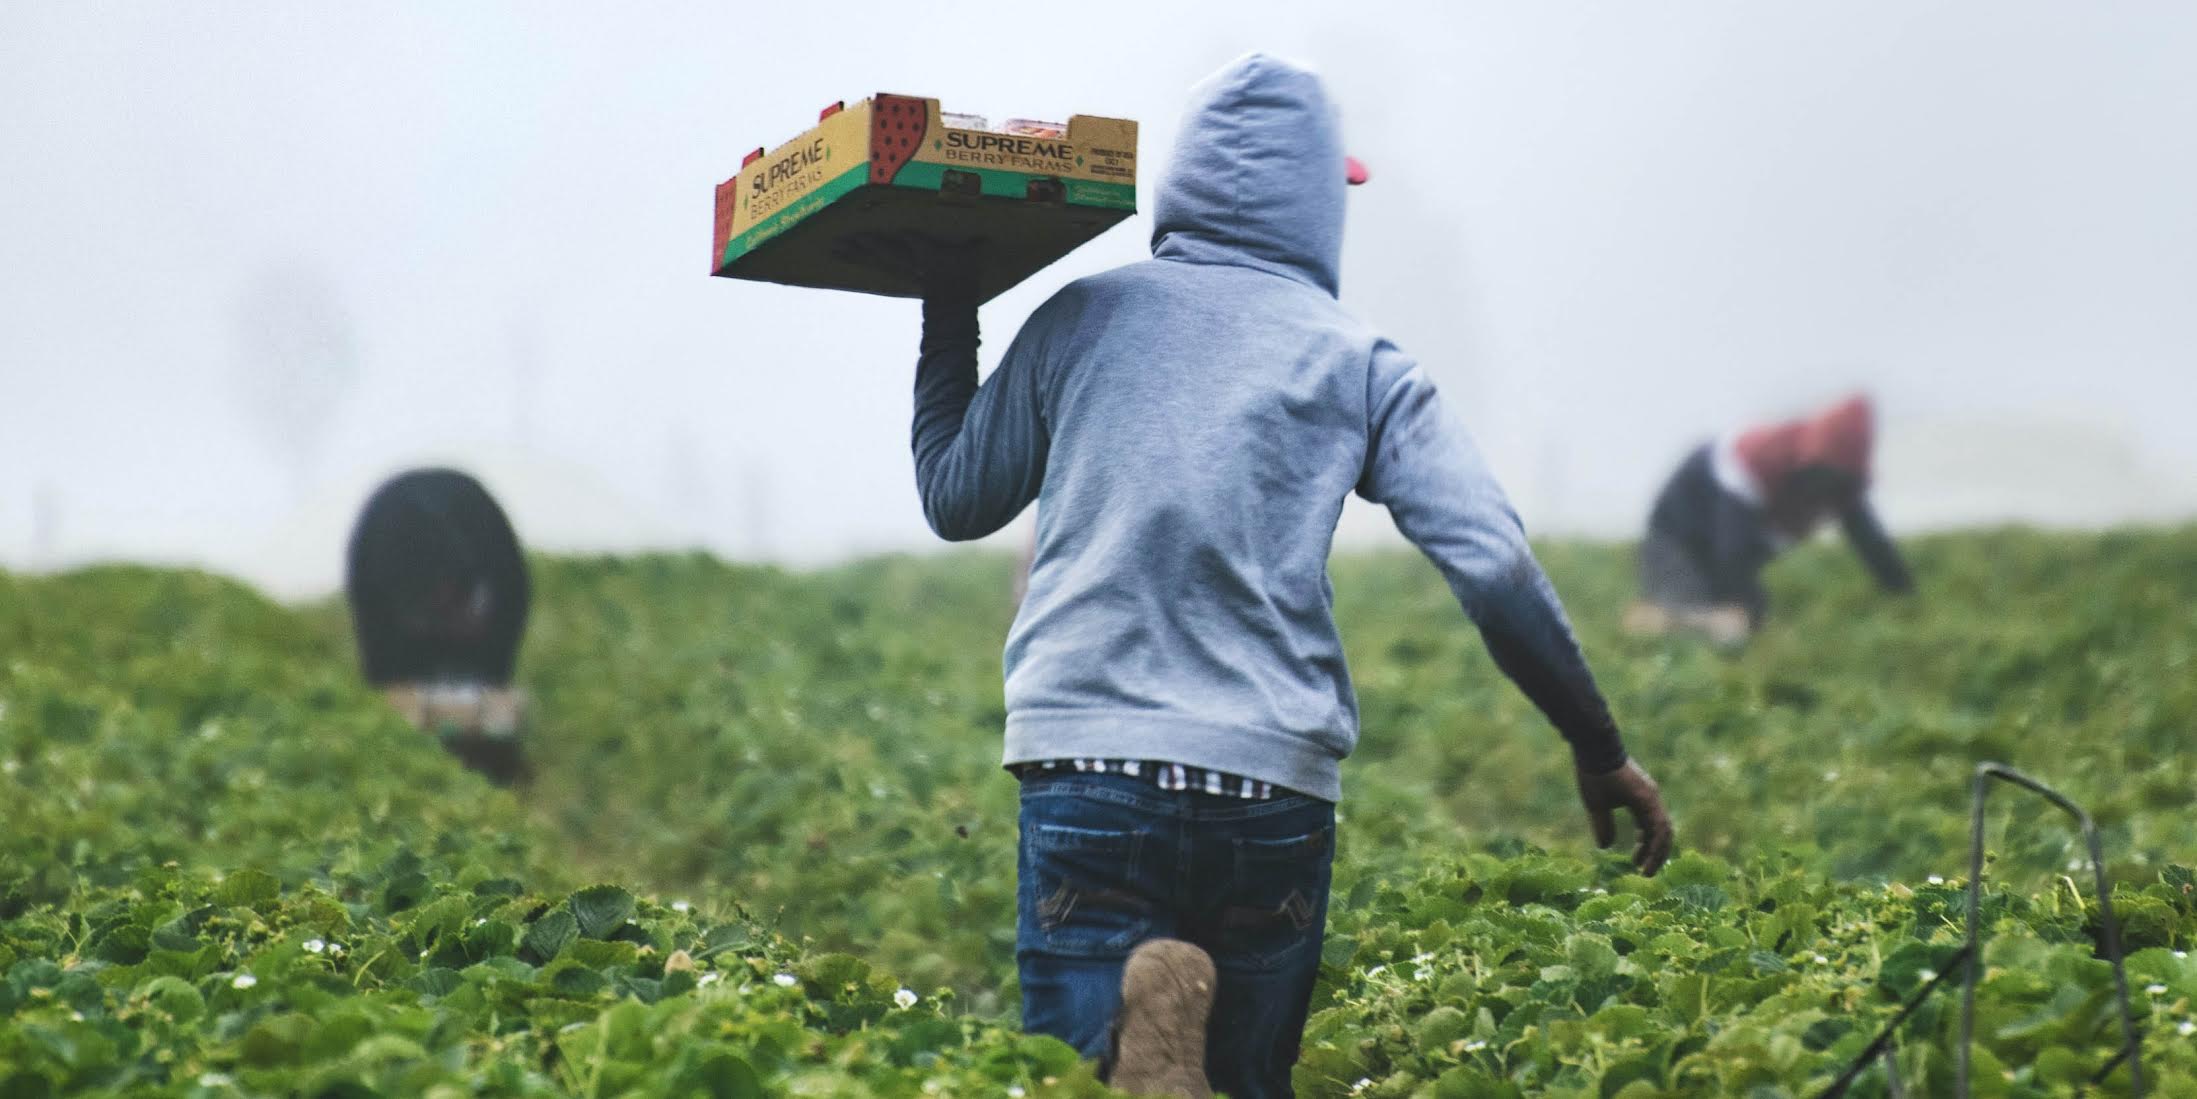 Fairness for Farmworkers